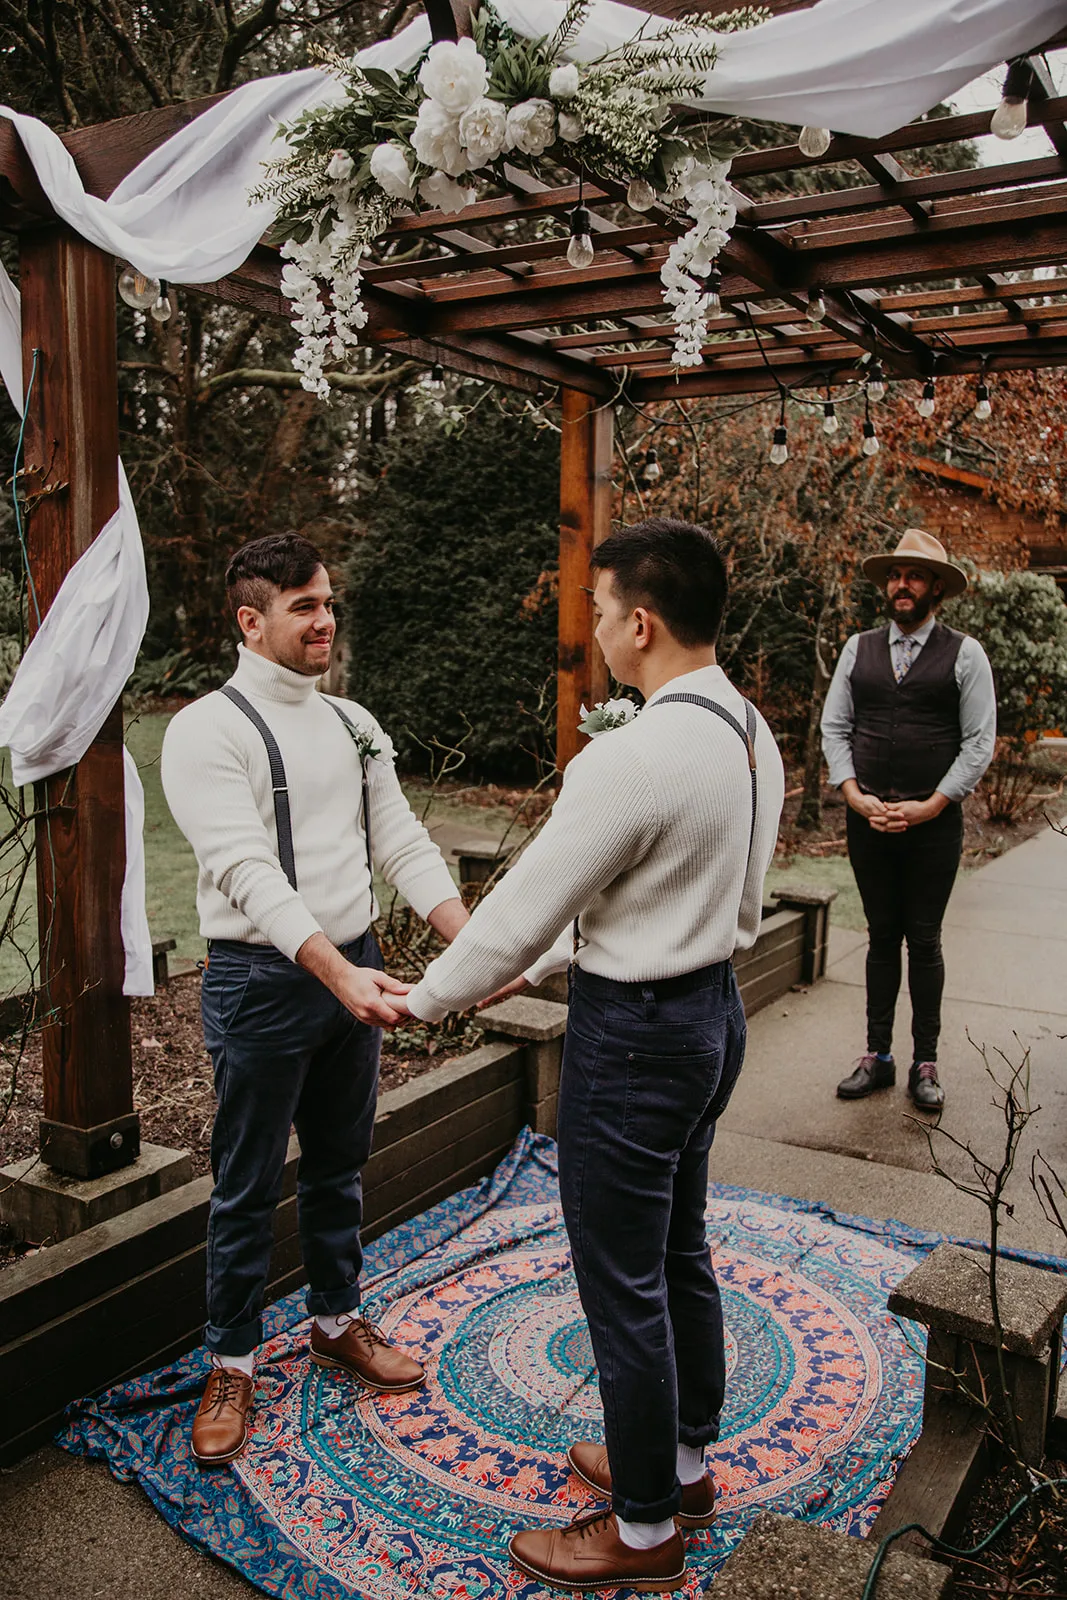 Shawn Miller officiating a ceremony while the two grooms hold hands in front of him